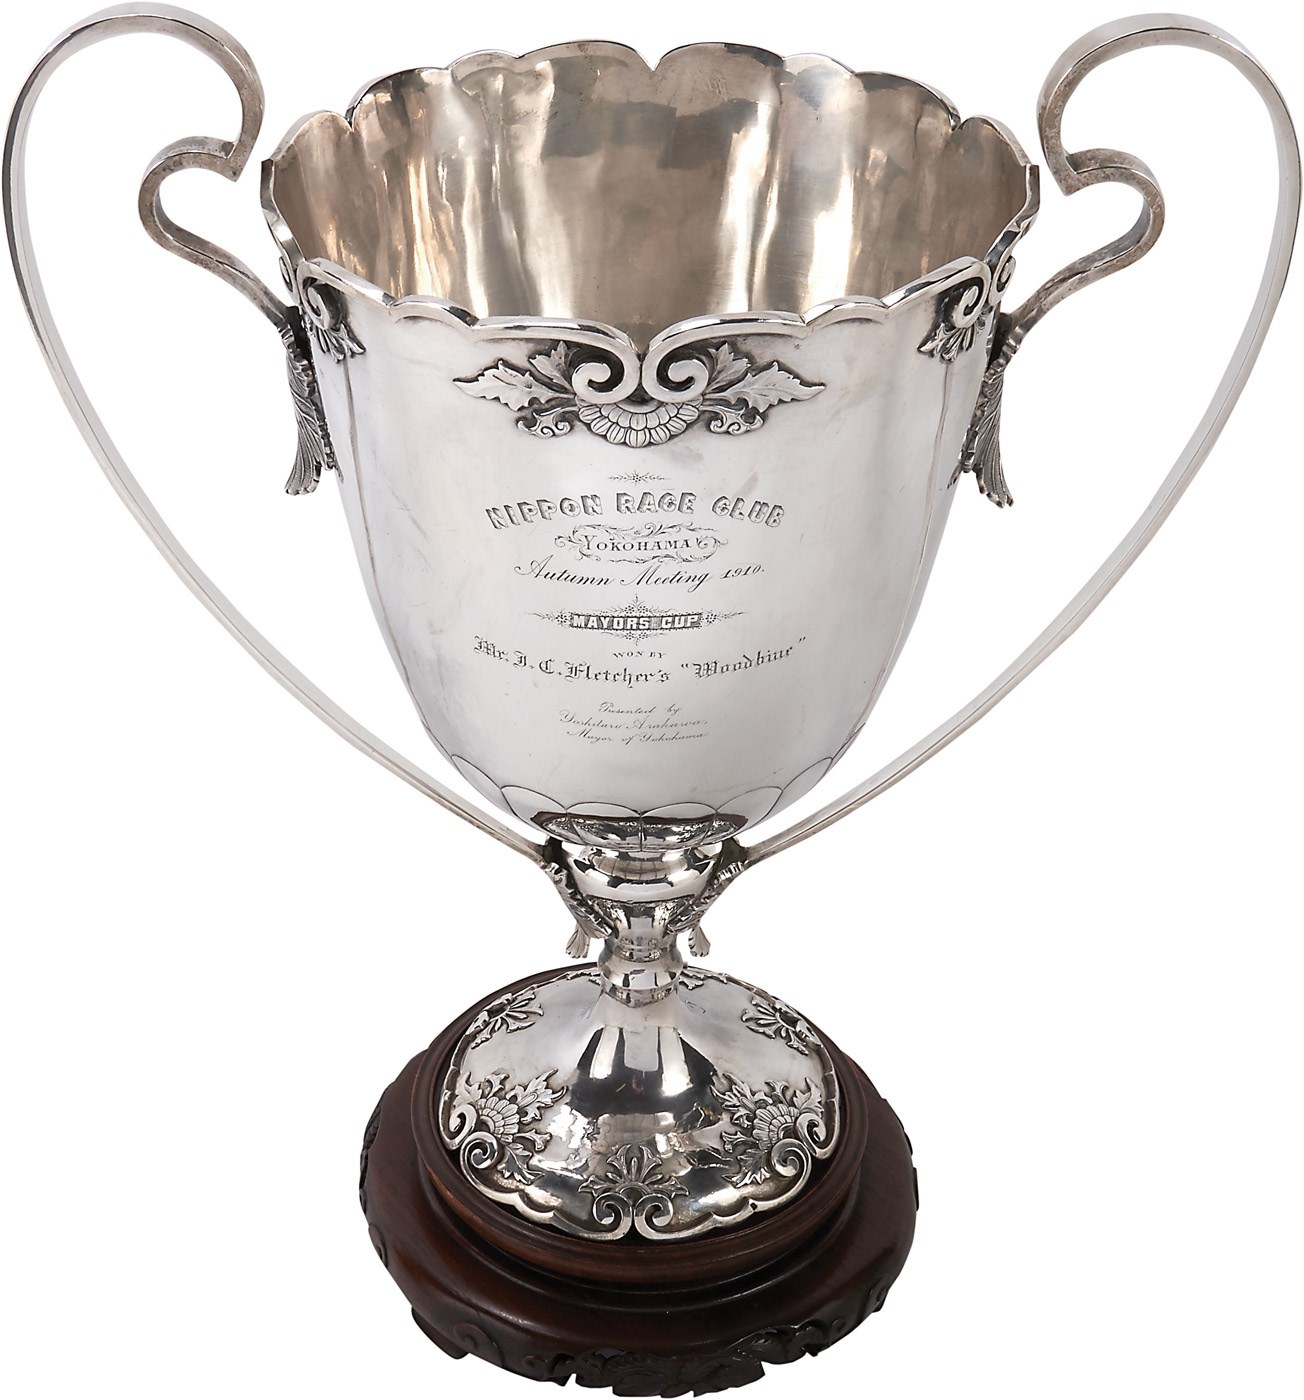 Incredible 1910 "Mayor's Cup" - Japanese Silver Trophy Presented to "Woodbine"